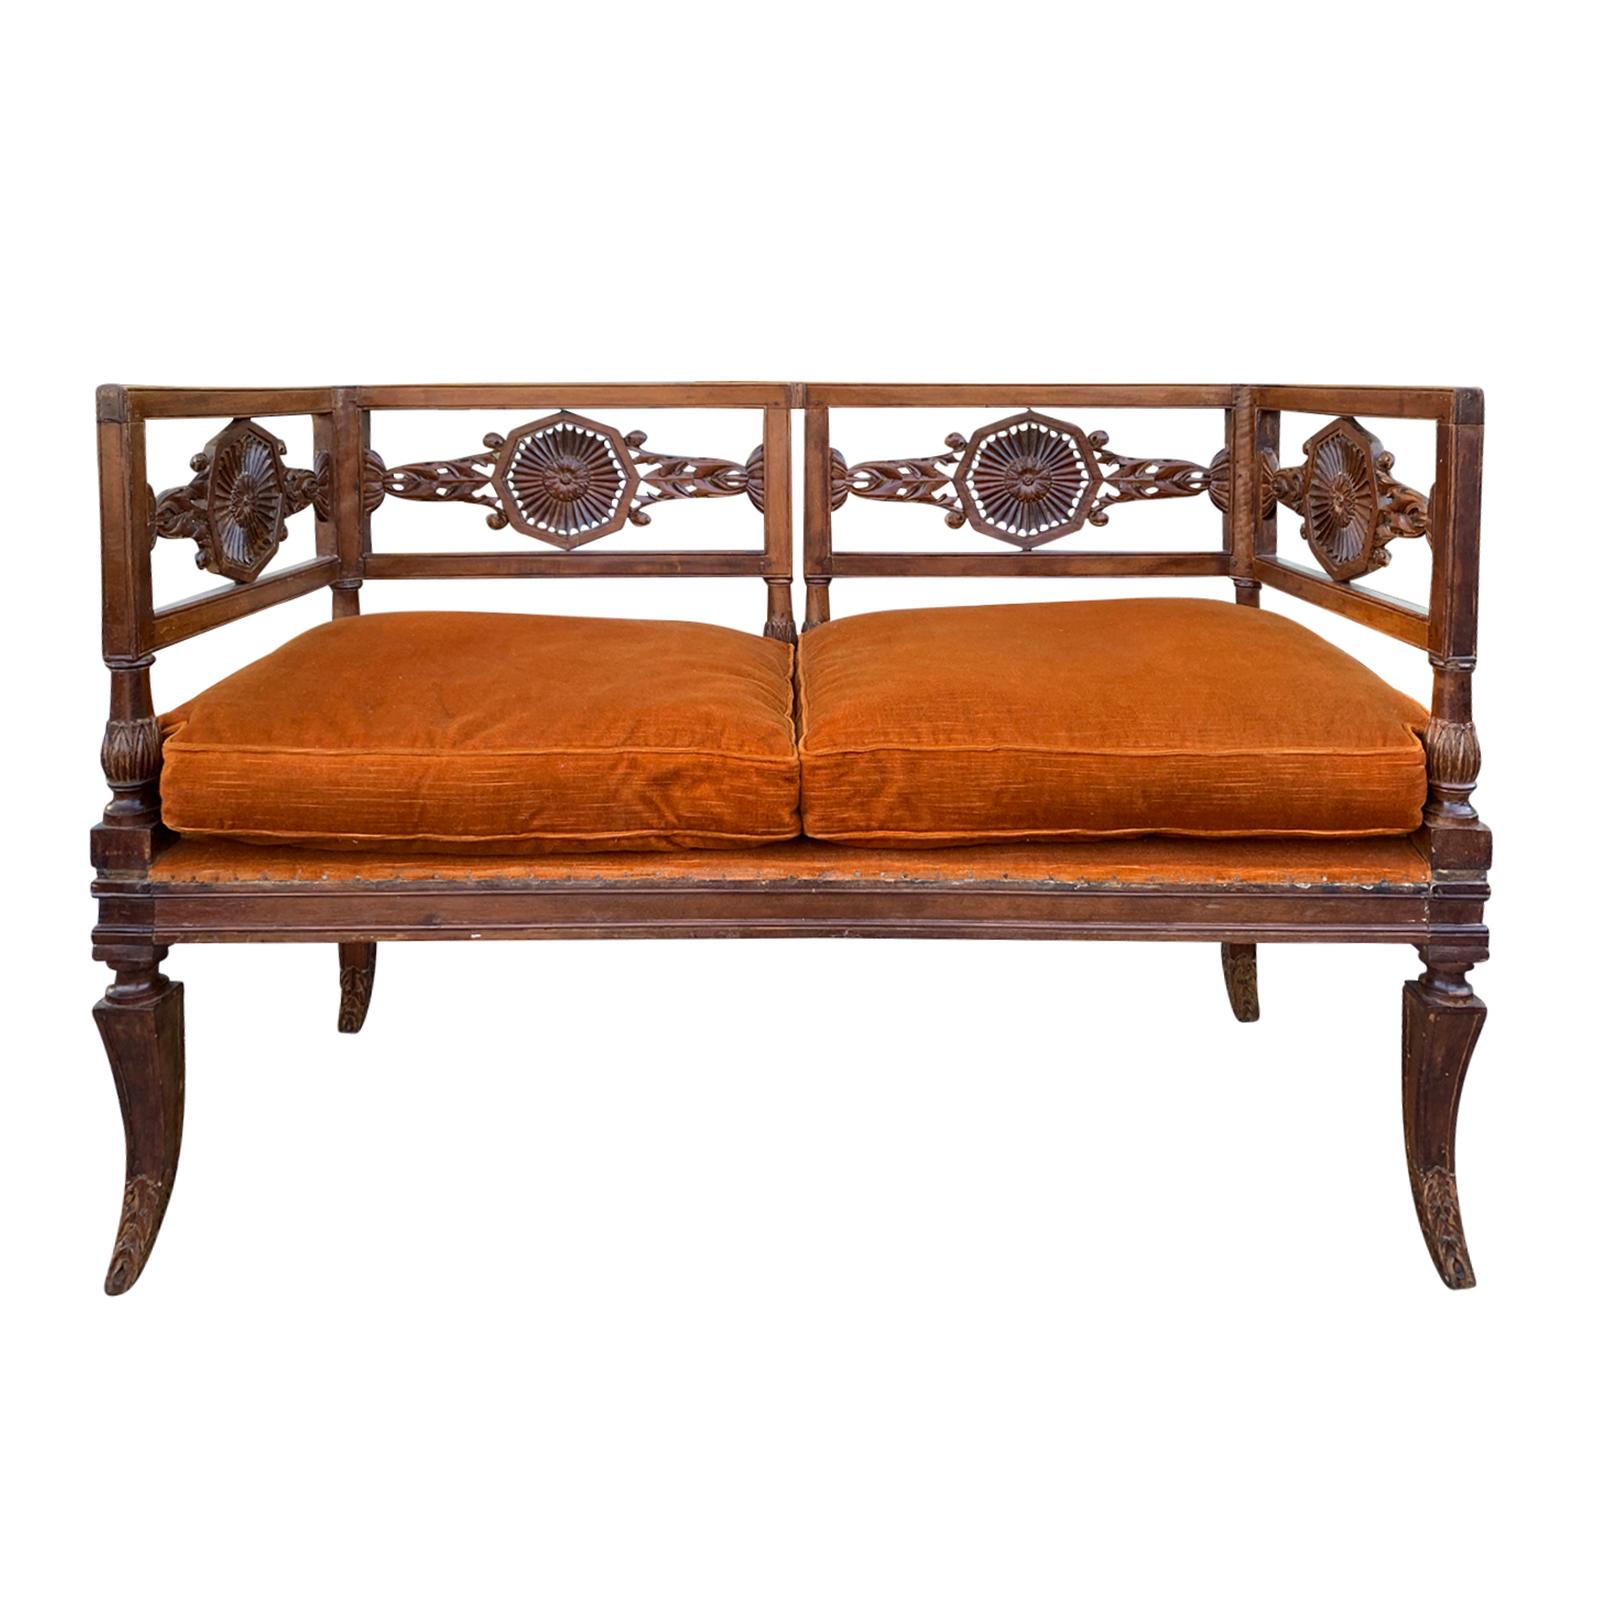 19th Century Carved Italian Neoclassical Settee